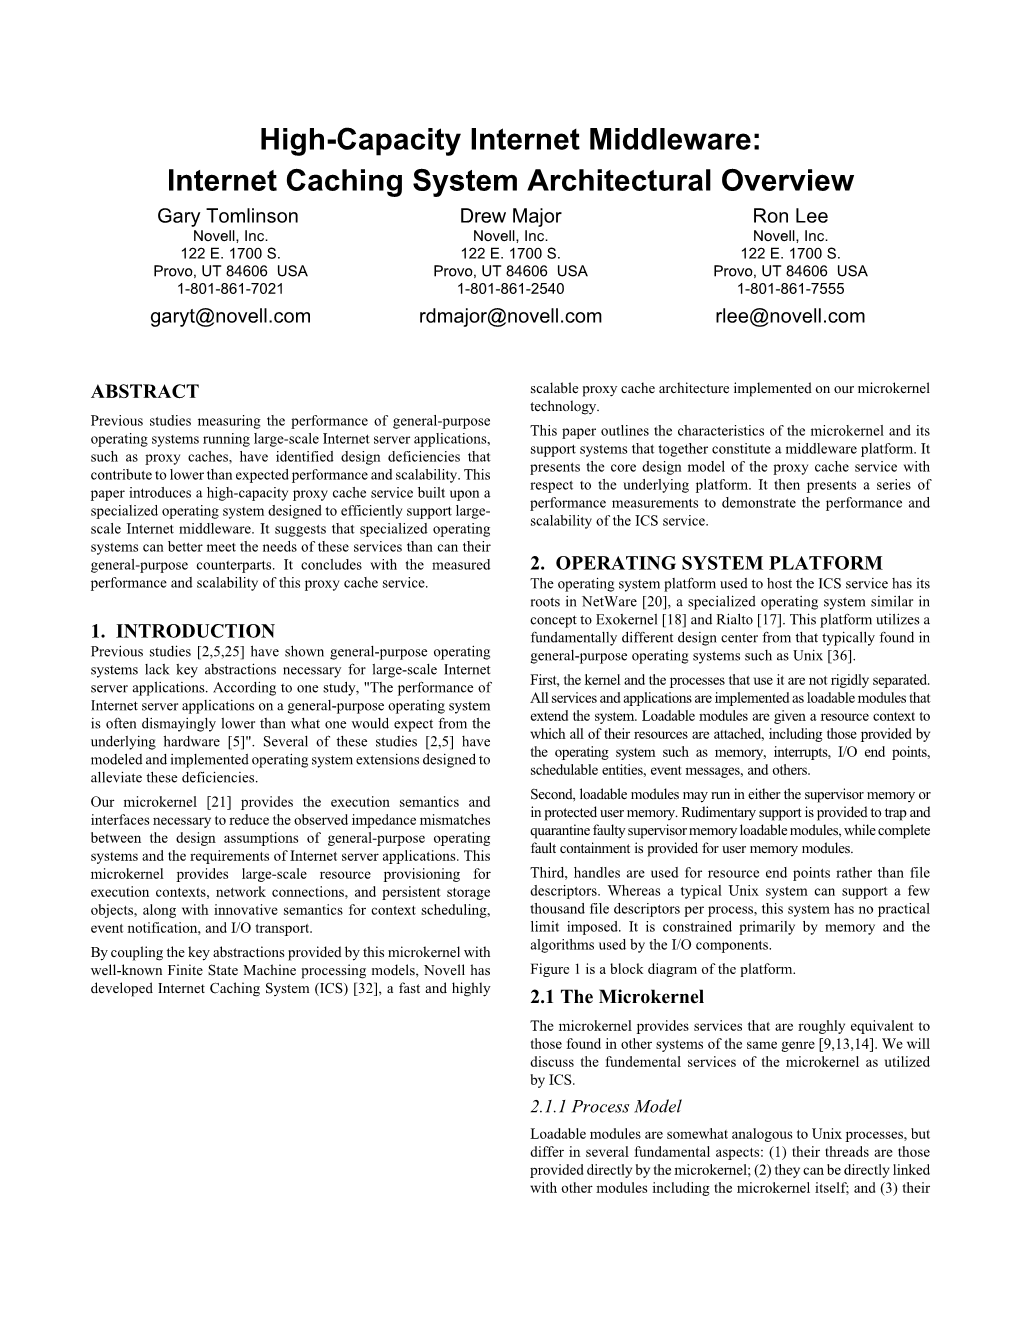 Internet Caching System Architectural Overview Gary Tomlinson Drew Major Ron Lee Novell, Inc